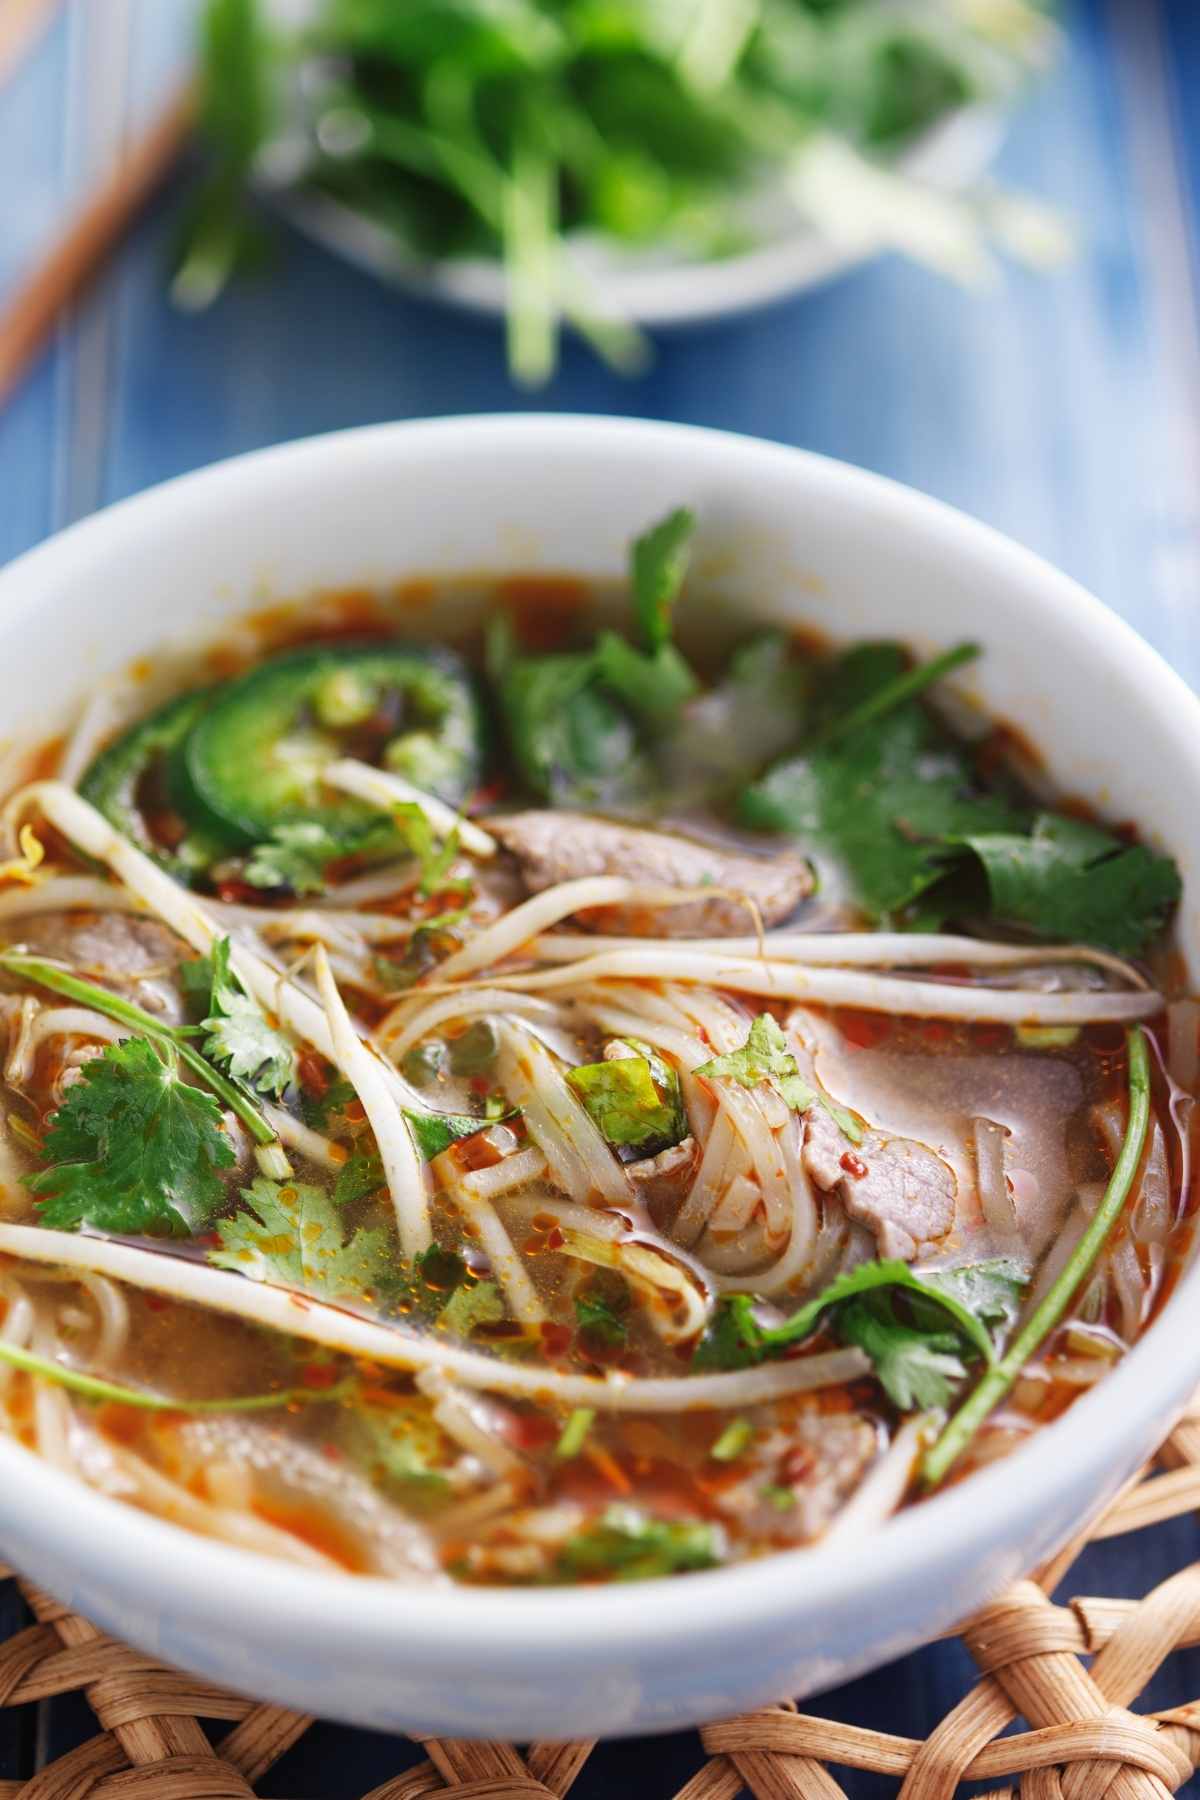 This recipe for Vietnamese Pho Tai has all of the delicious beefy flavors you love, including a broth that’s top-notch! The next time you’re craving a steaming hot bowl of Vietnamese Pho, head to your kitchen instead of a restaurant!